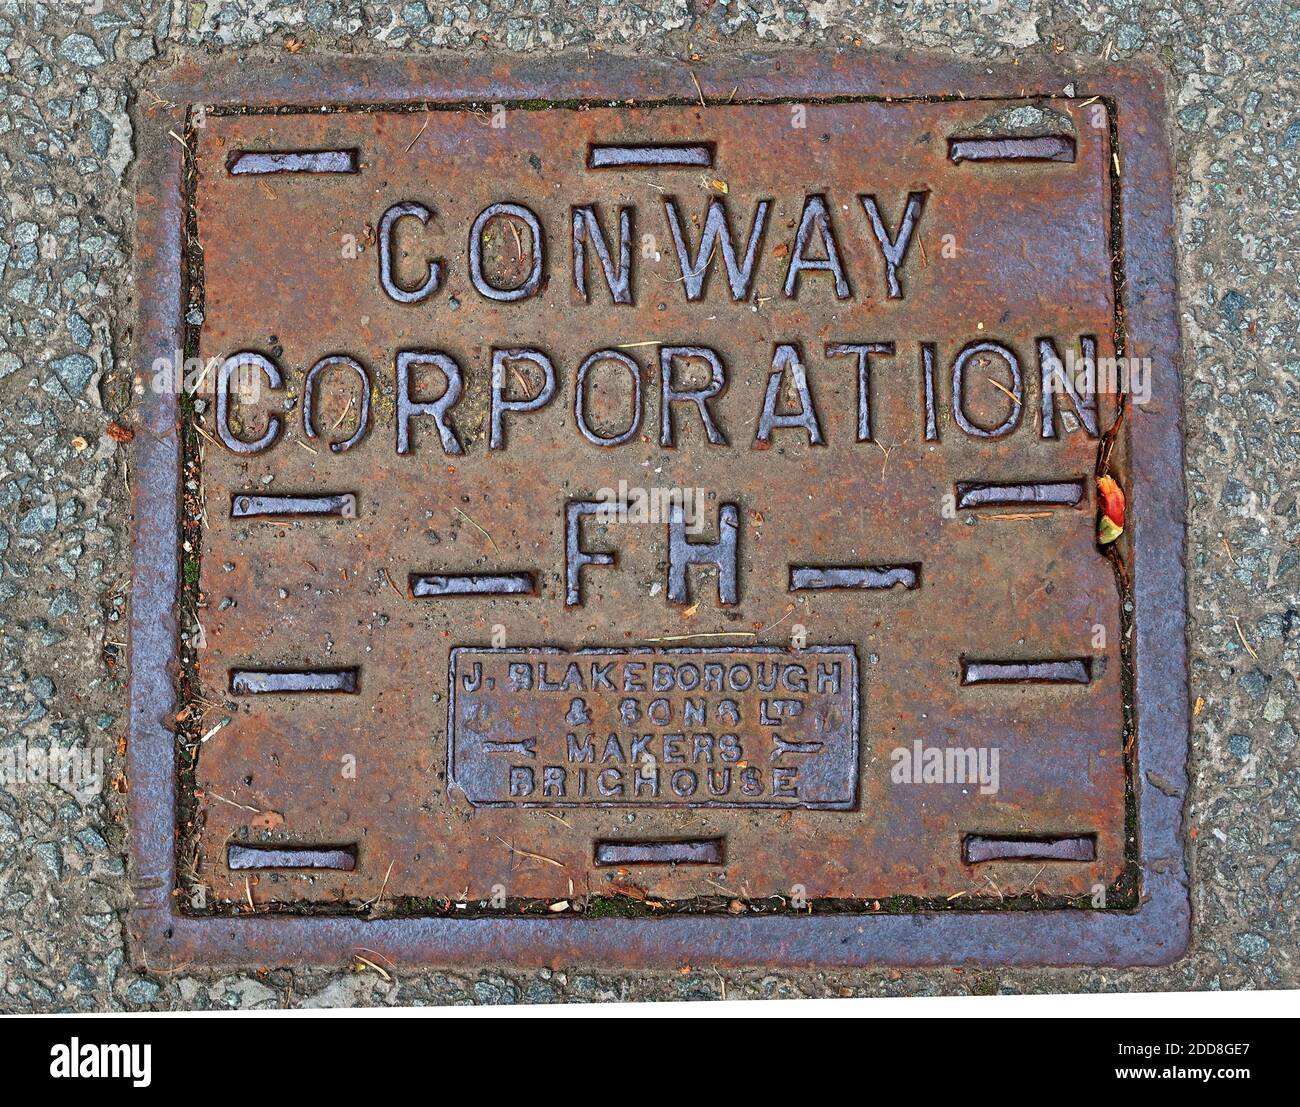 Conway Corporation FH,Conwy Corporation FH,Fire Hydrant Cover,Ironwork,Blakeborough,Makers Brightouse Banque D'Images